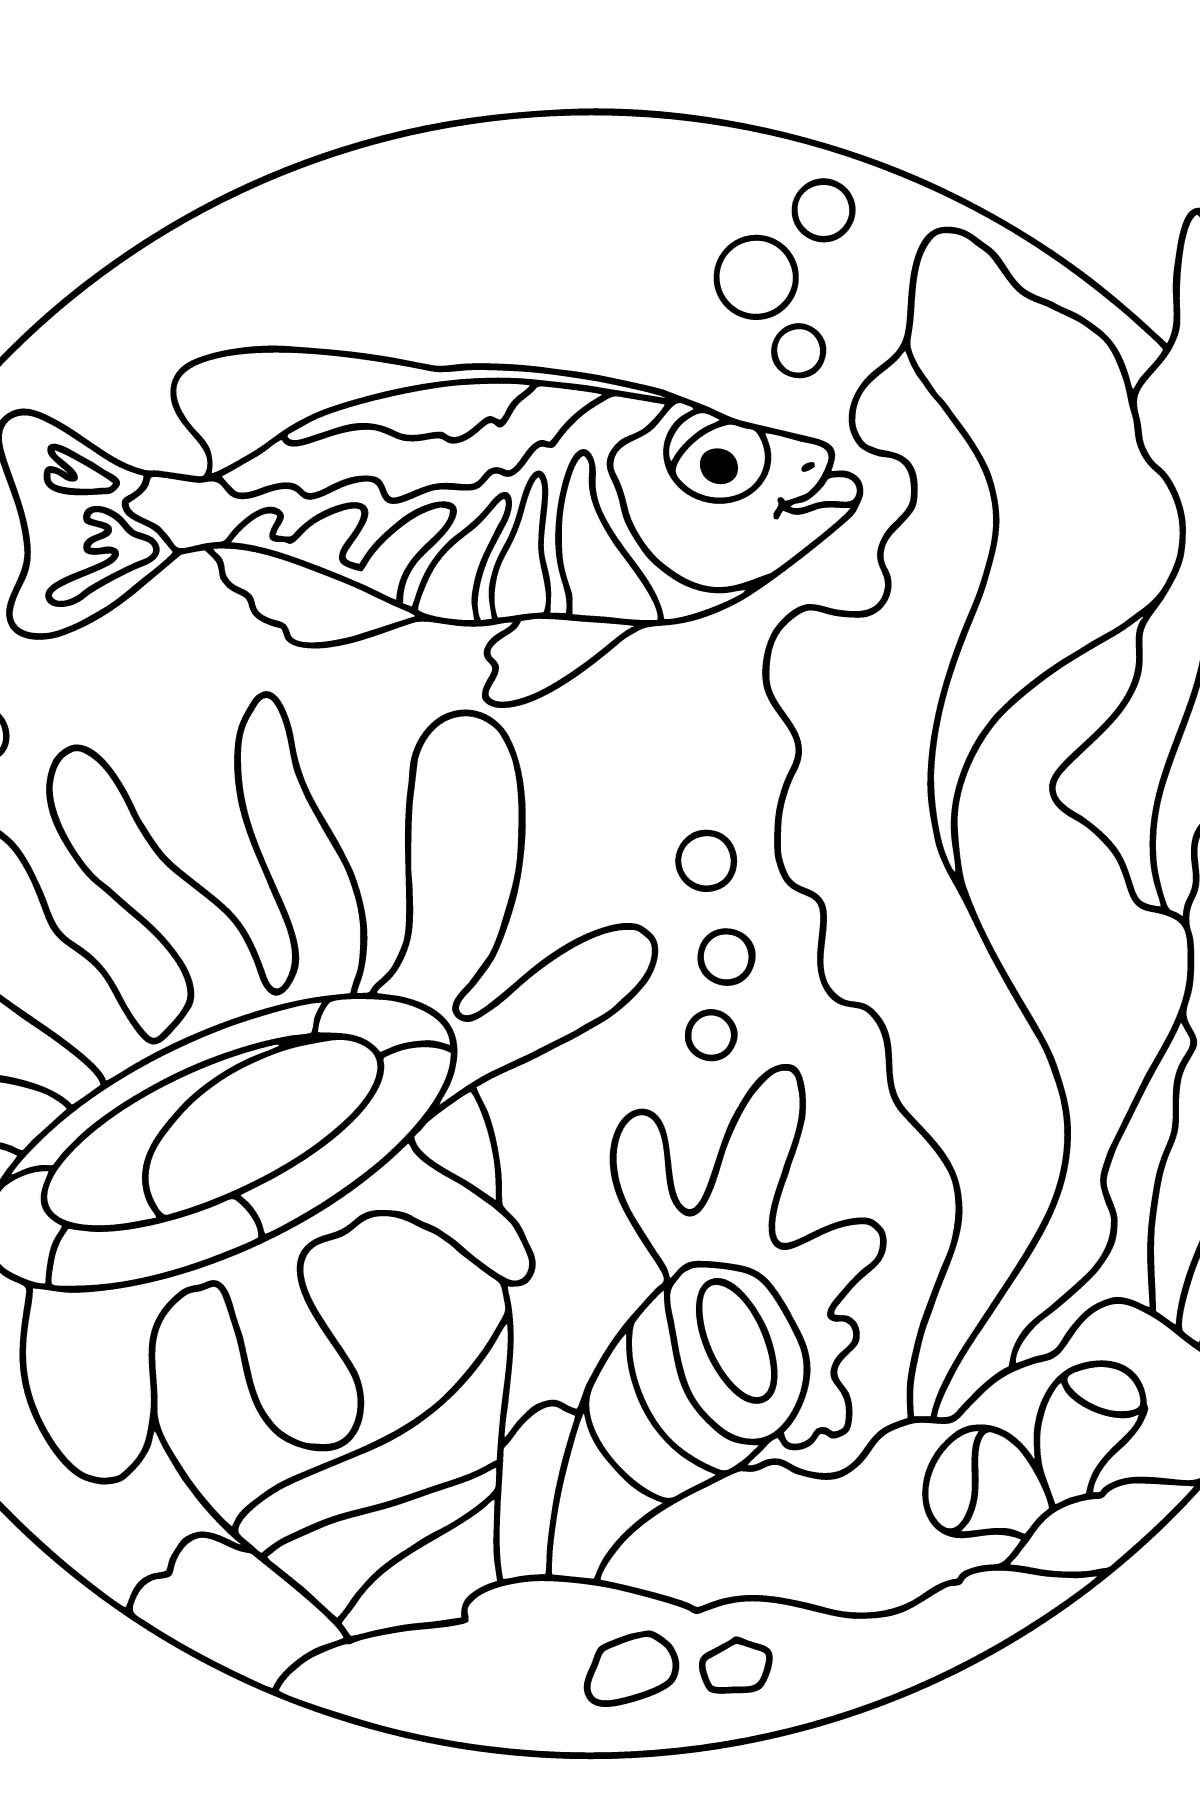 Coloring Page - A Fish is Swimming - Coloring Pages for Kids